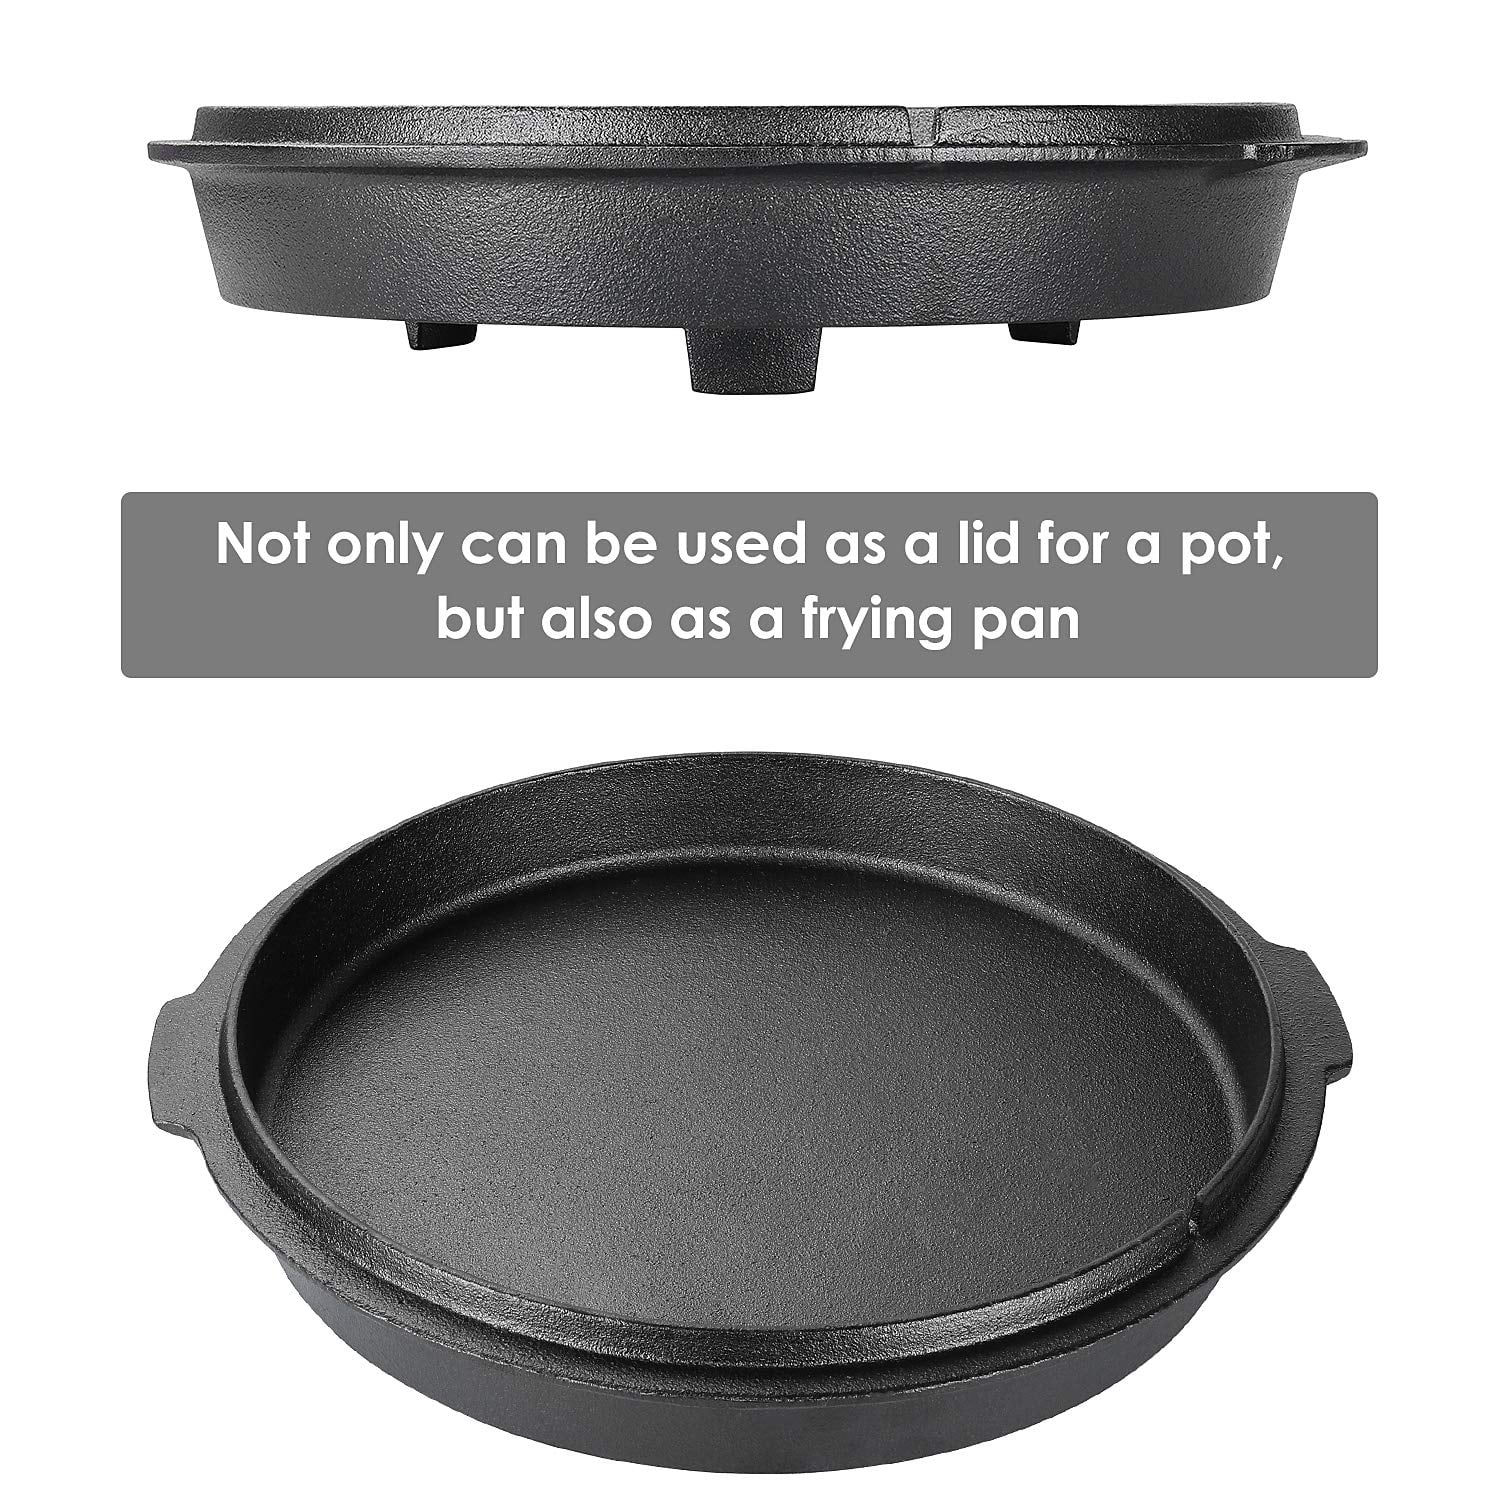  LIFERUN Dutch Oven Pot with Lid, 12 Quart Cast Iron Dutch Oven,  without Feet, with Stand & Spiral-shaped Handle, Cast Iron Pot for Outdoor  & Indoor: Home & Kitchen